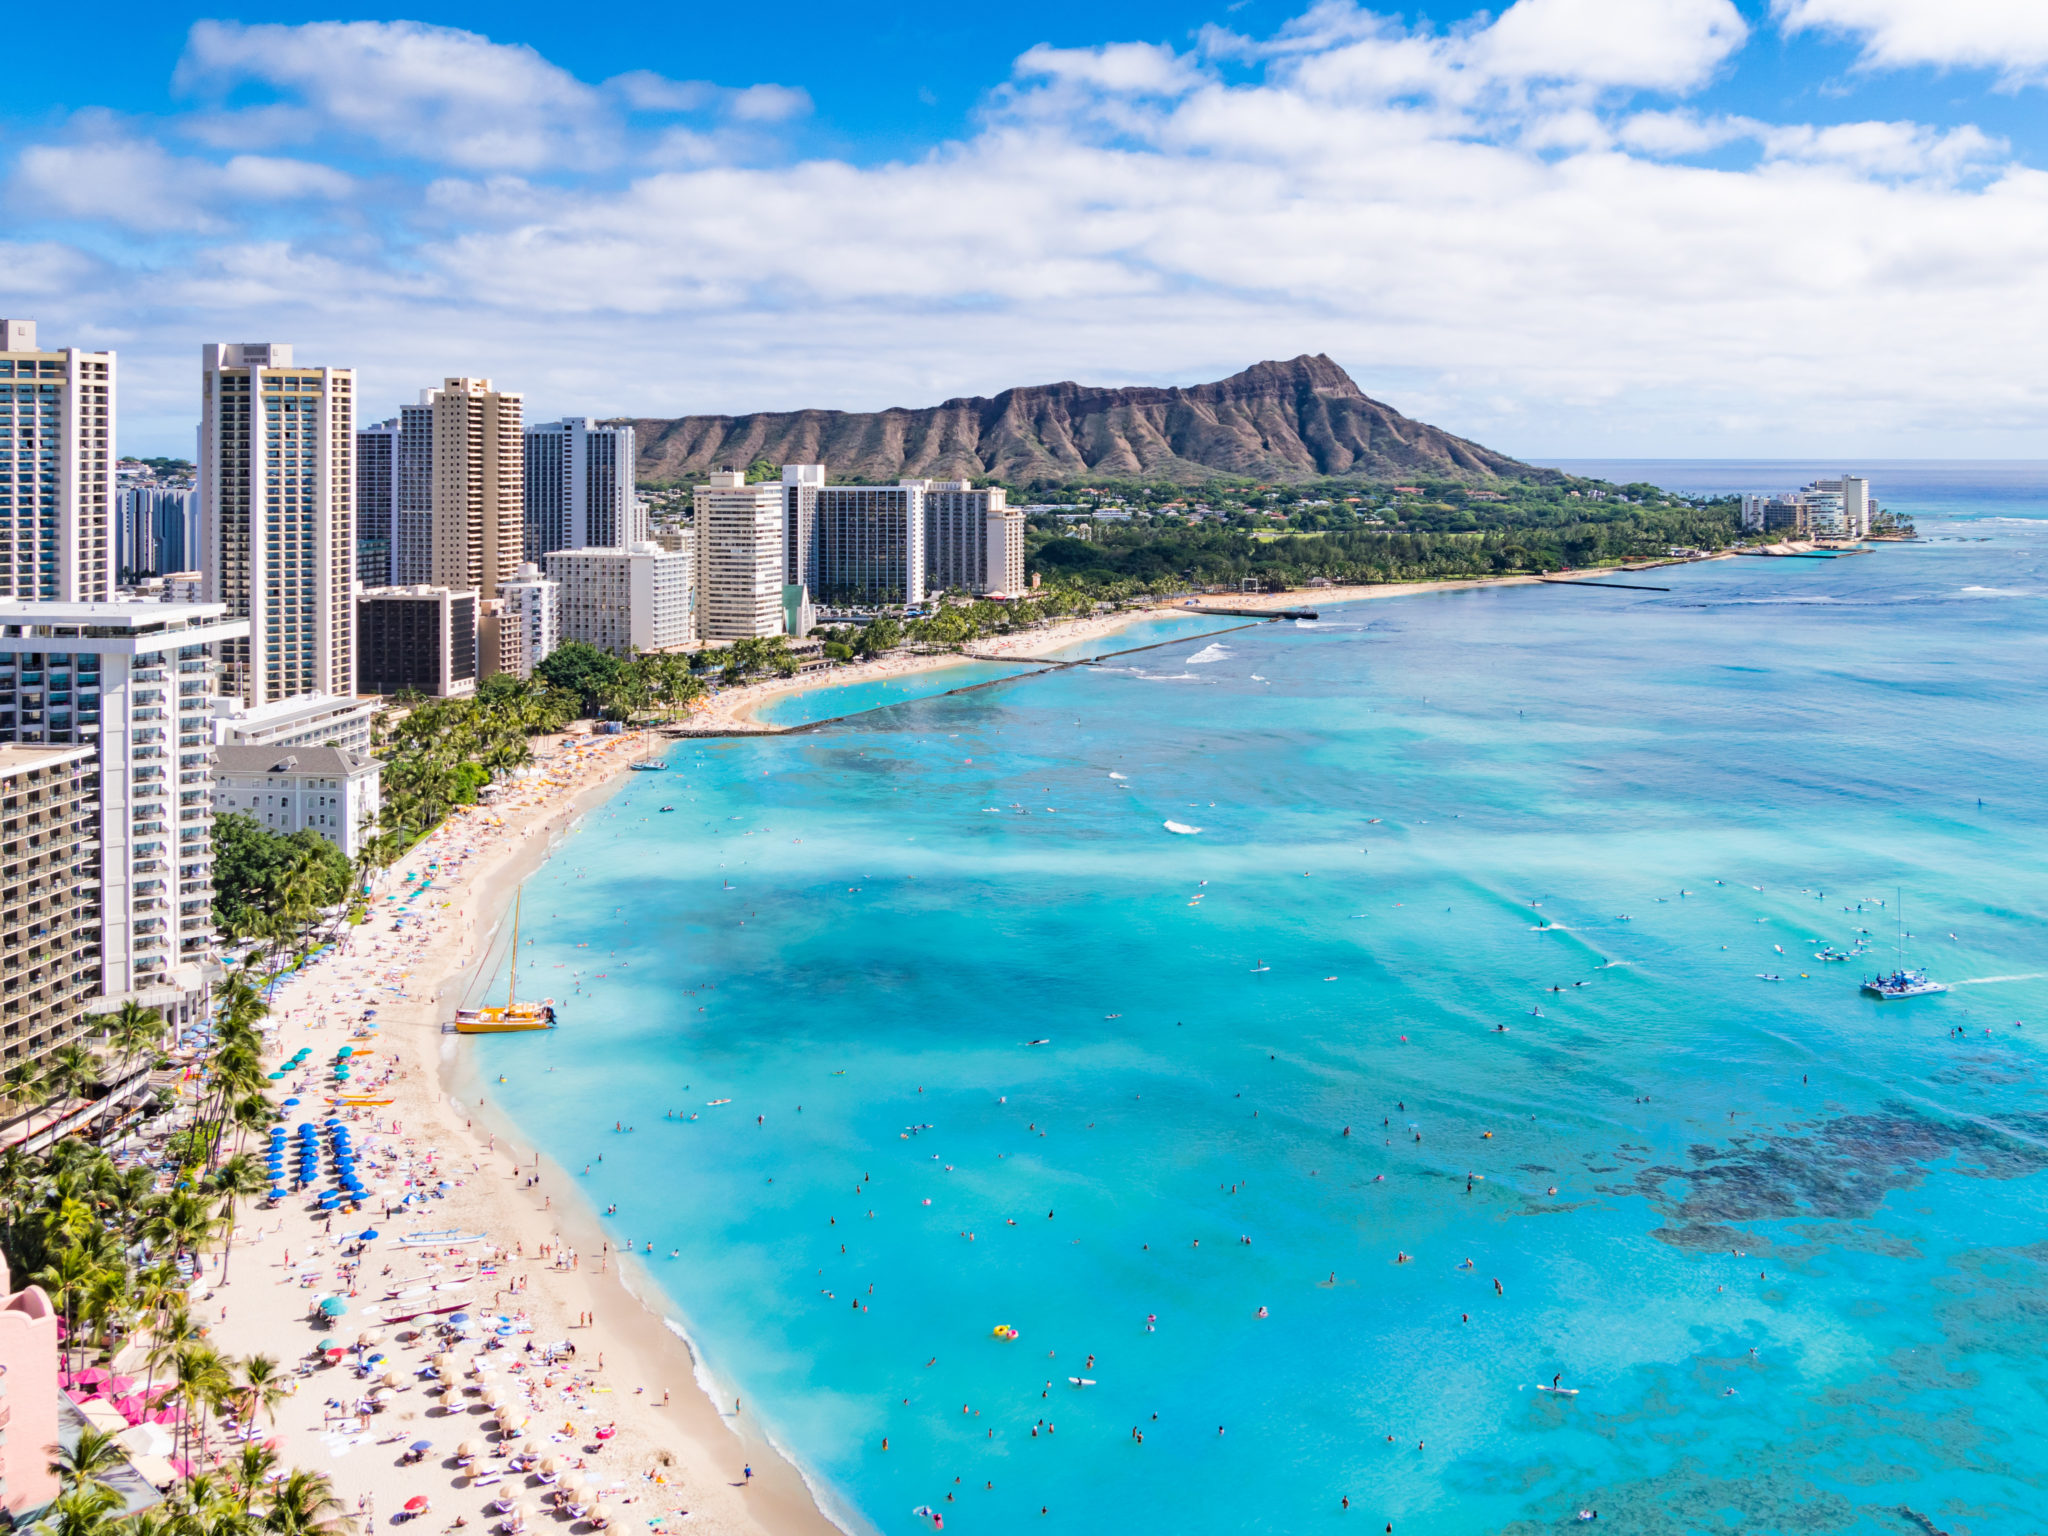 Waikiki Beach and Diamond Head Crater including the hotels and